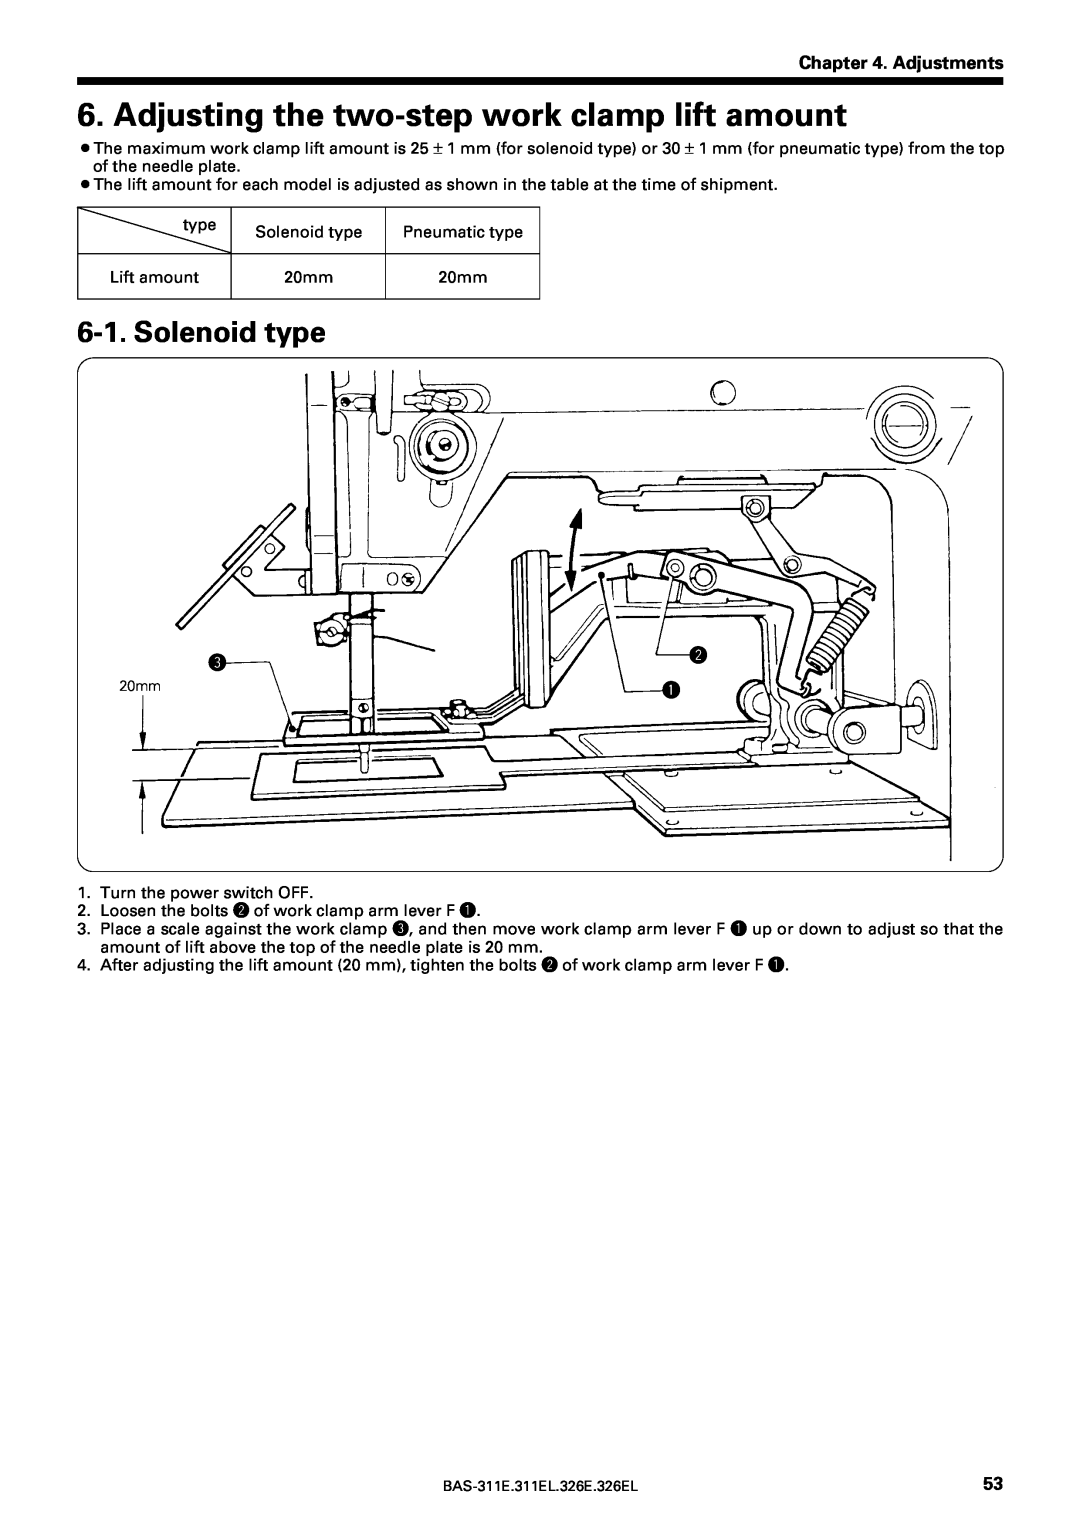 Brother BAS-311E service manual Adjusting the two-step work clamp lift amount, Solenoid type, Adjustments 